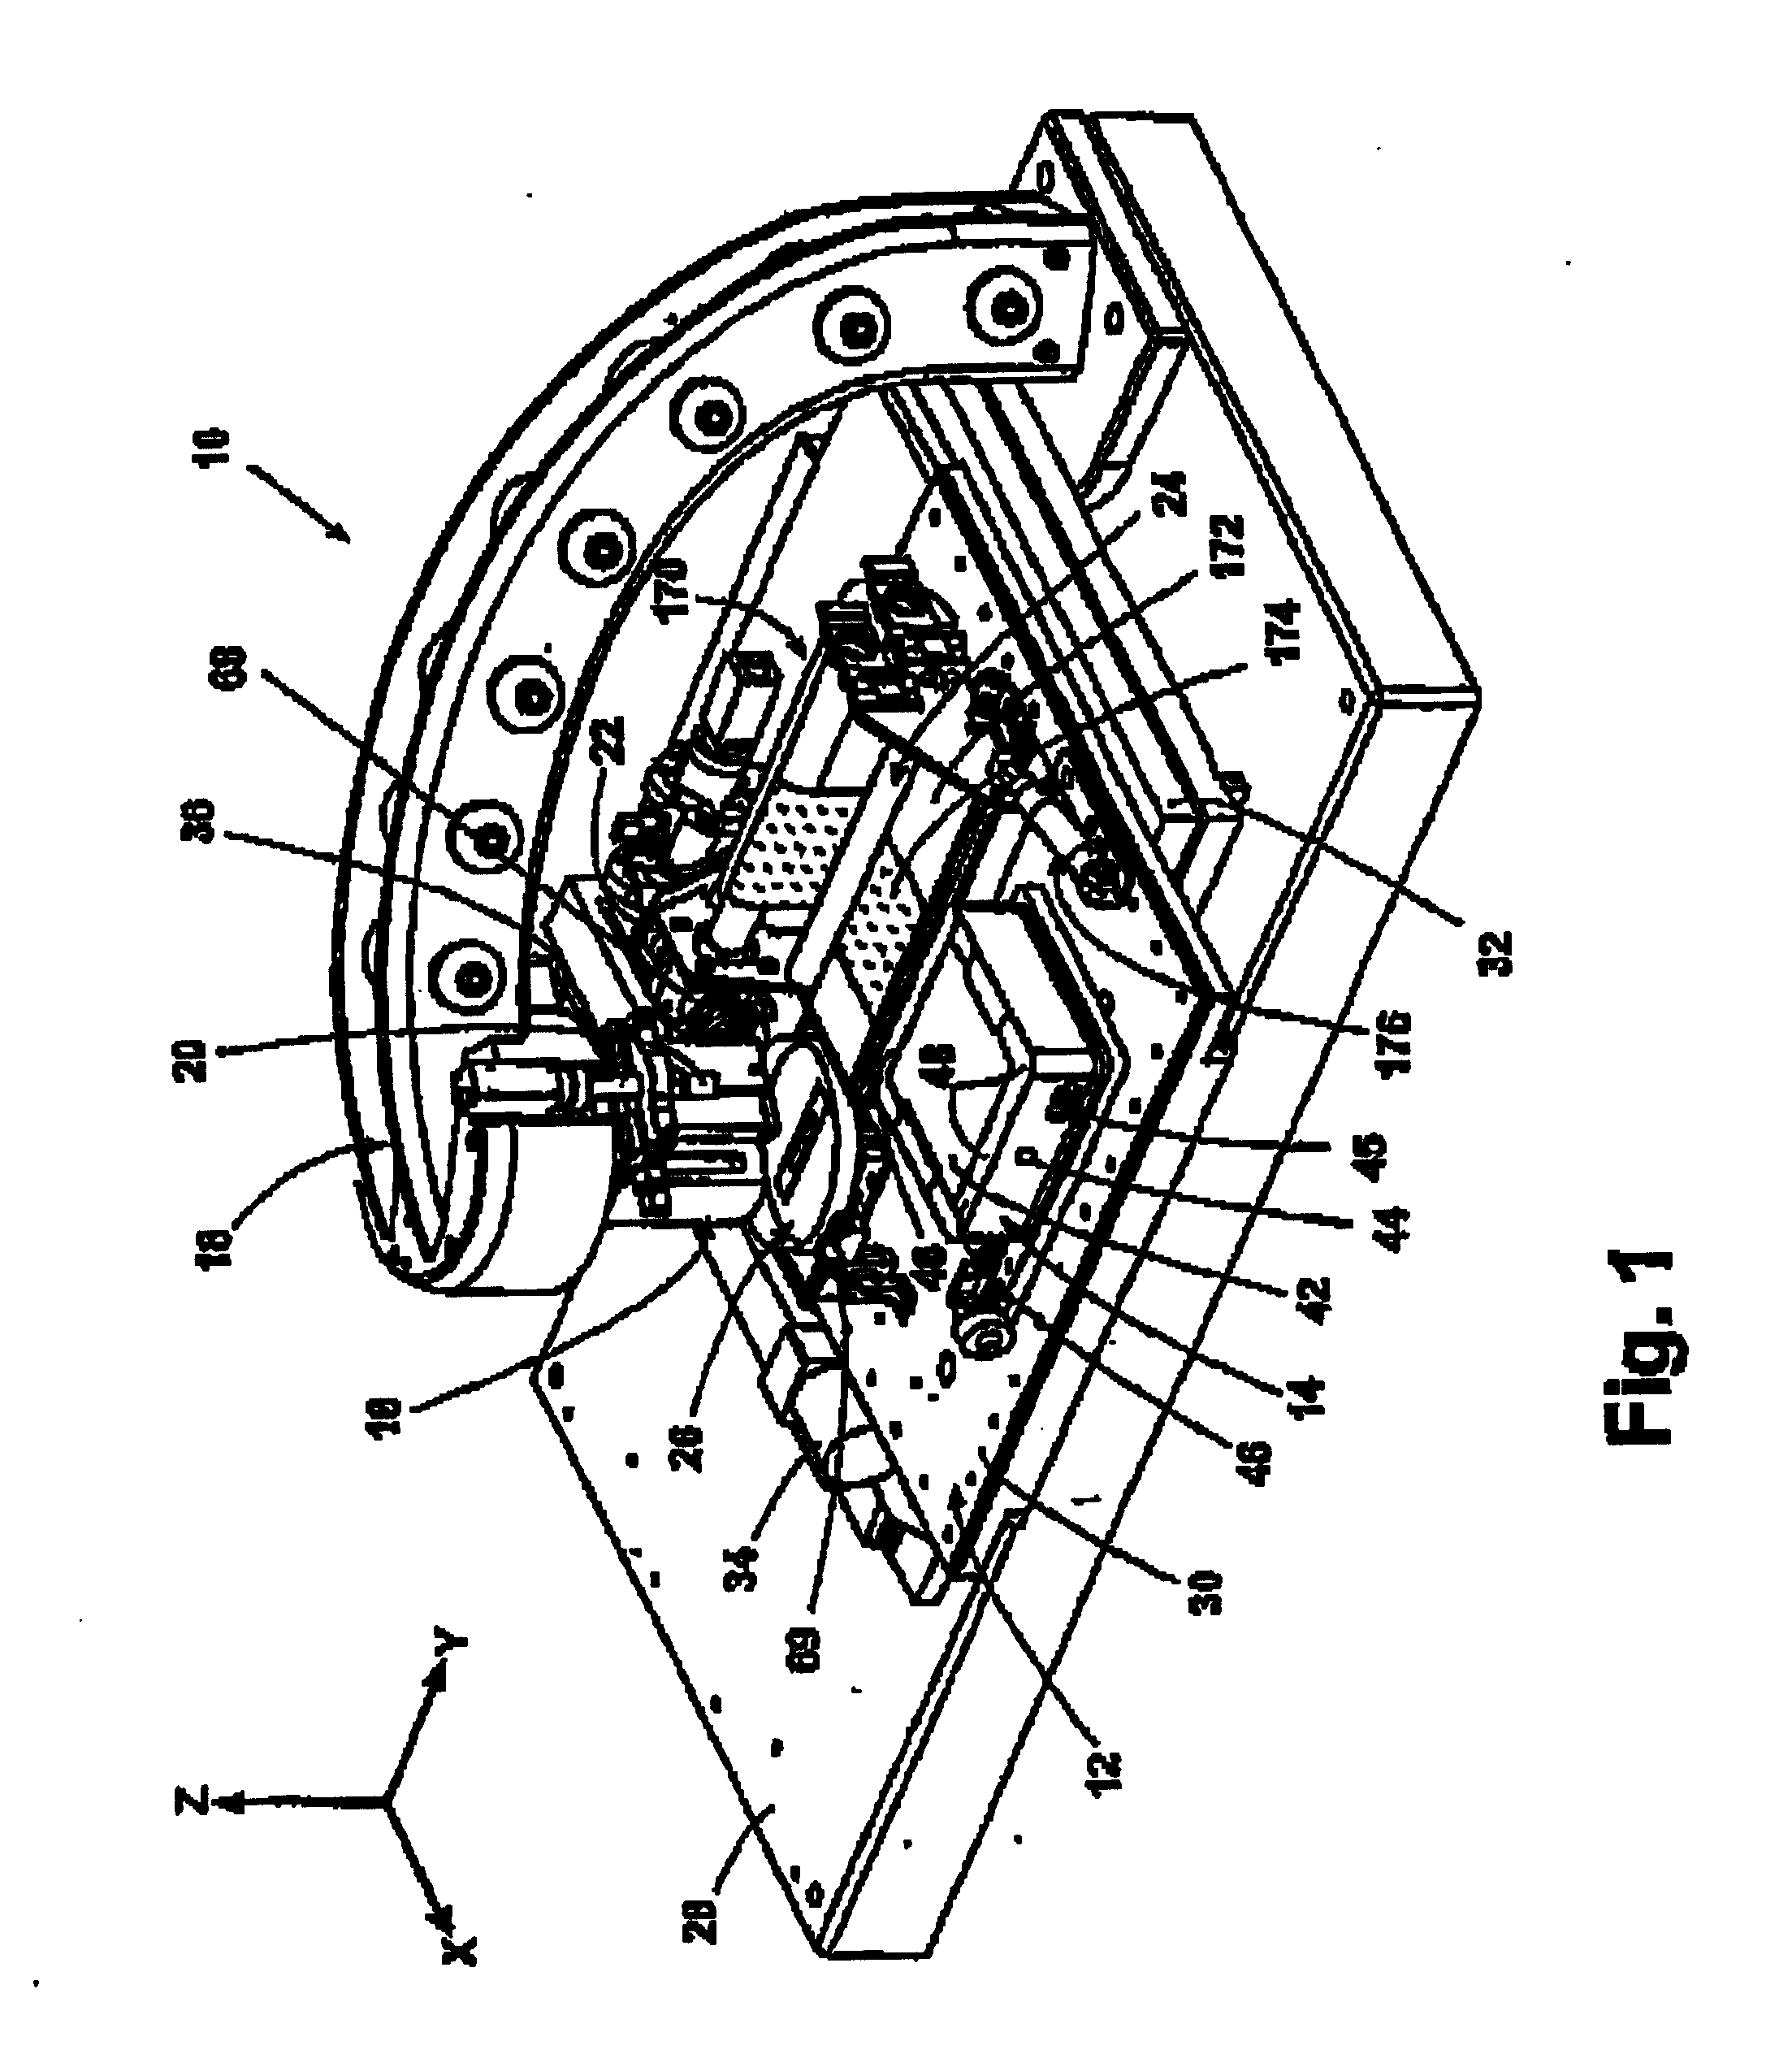 Interchangeable microdesition head apparatus and method